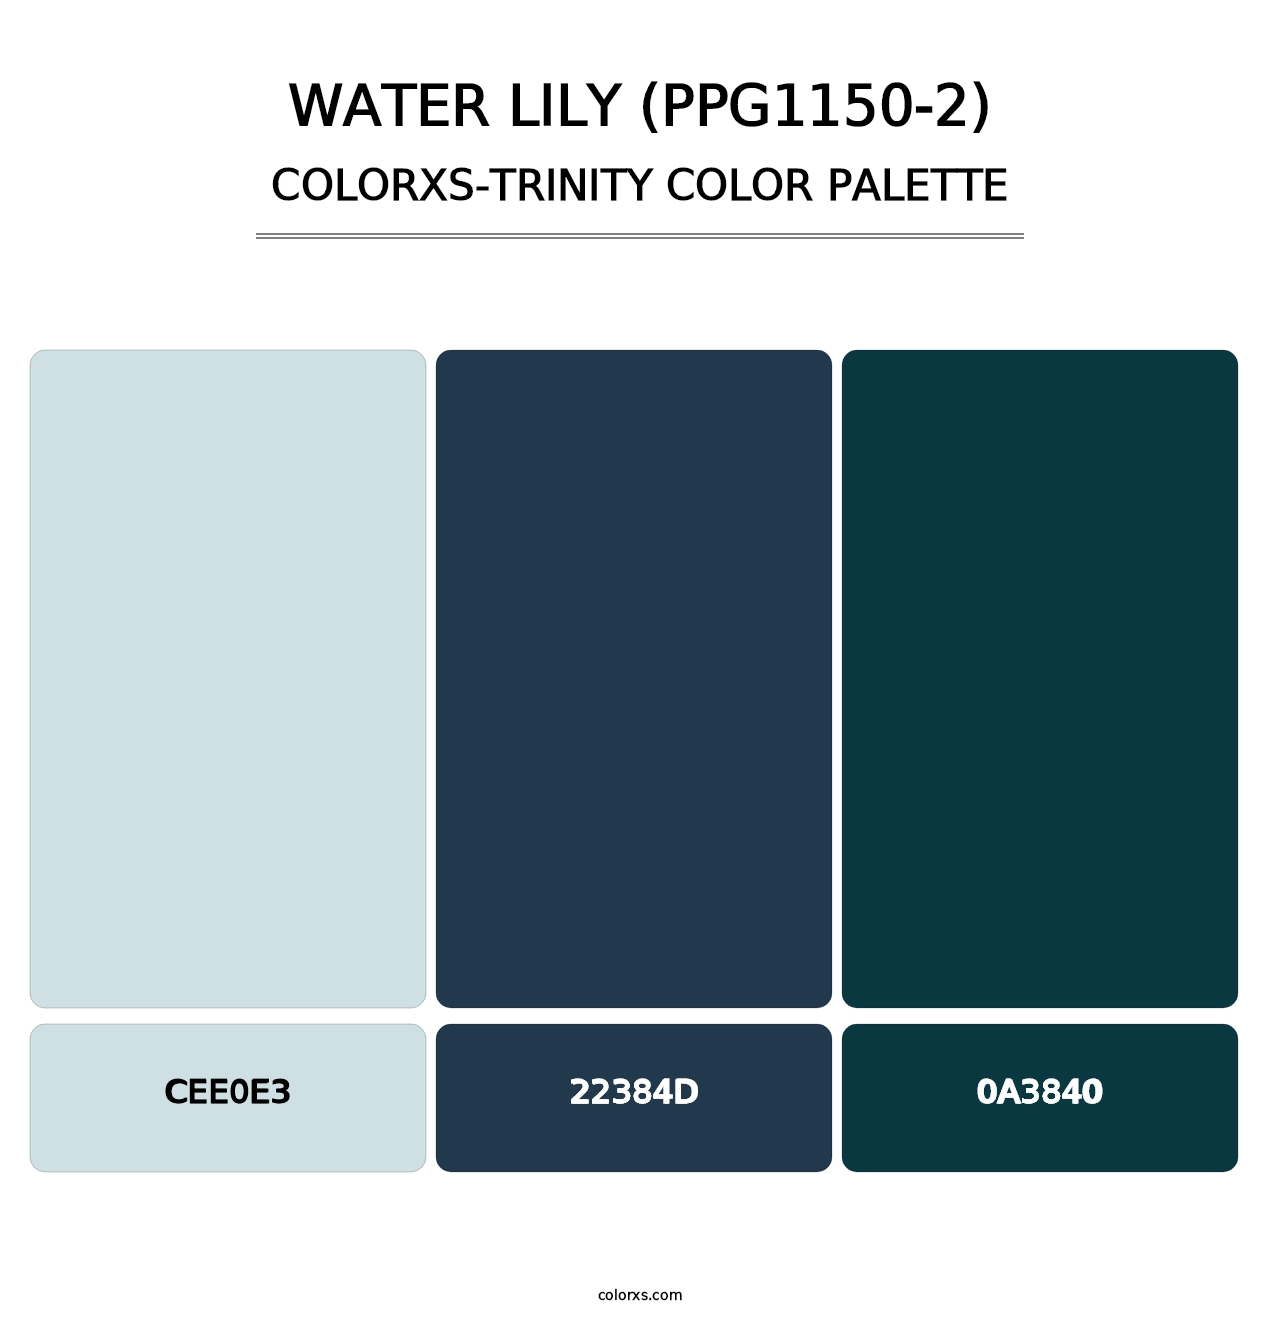 Water Lily (PPG1150-2) - Colorxs Trinity Palette